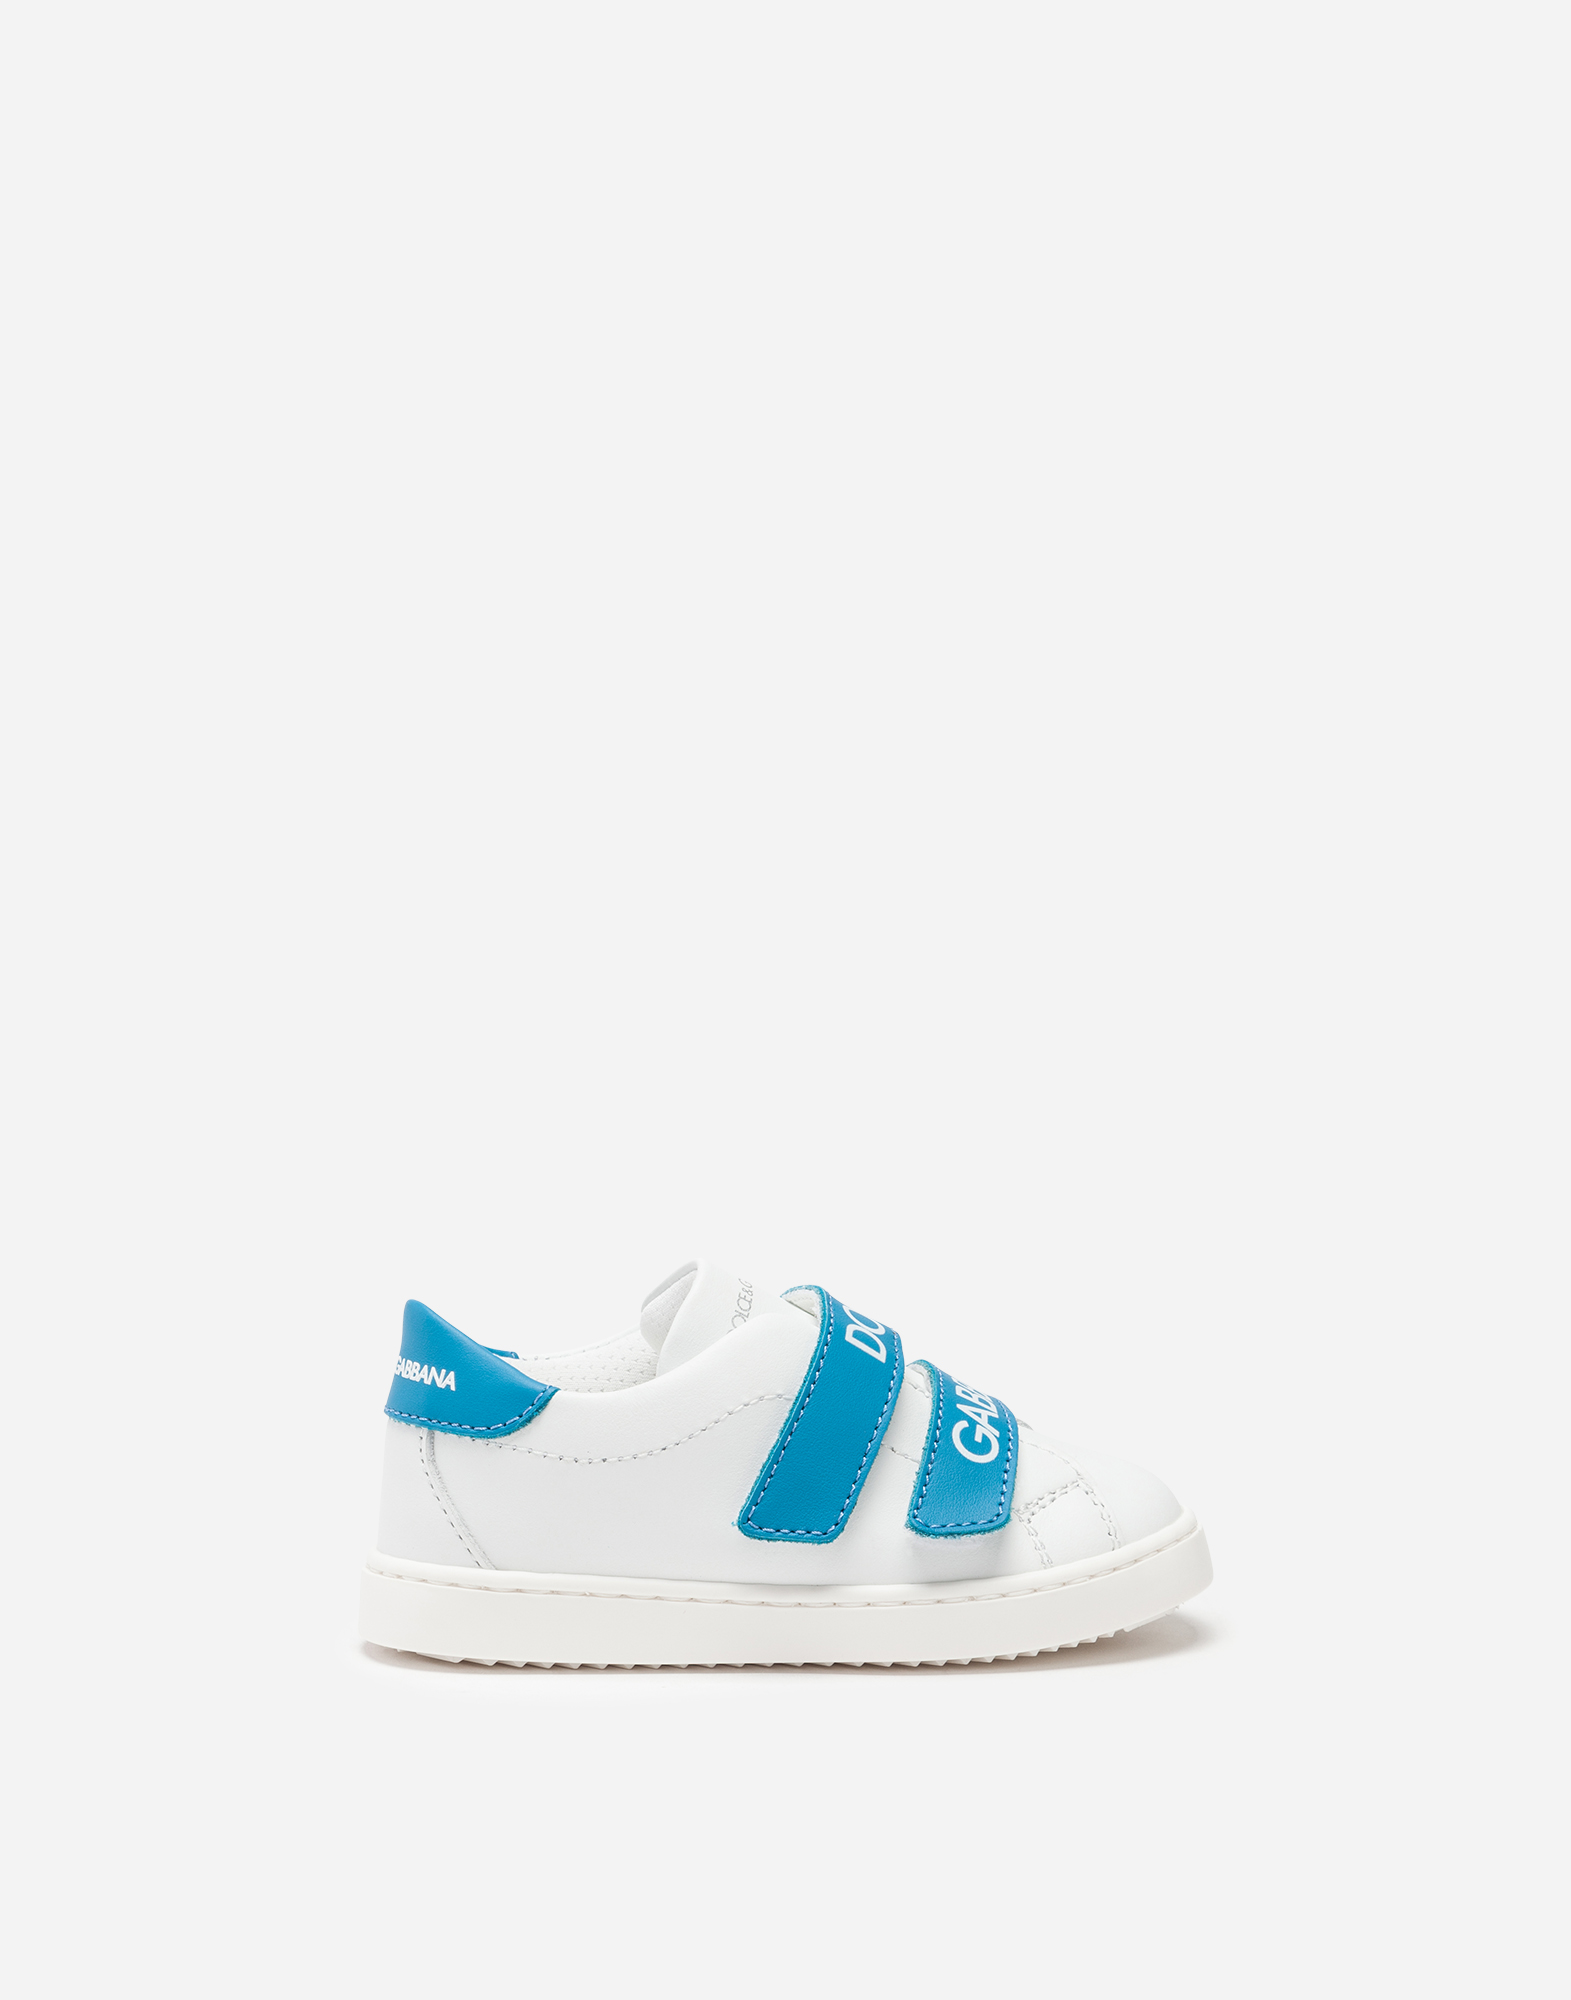 Dolce & Gabbana Babies' First Steps Portofino Sneakers In Branded Nappa Leather